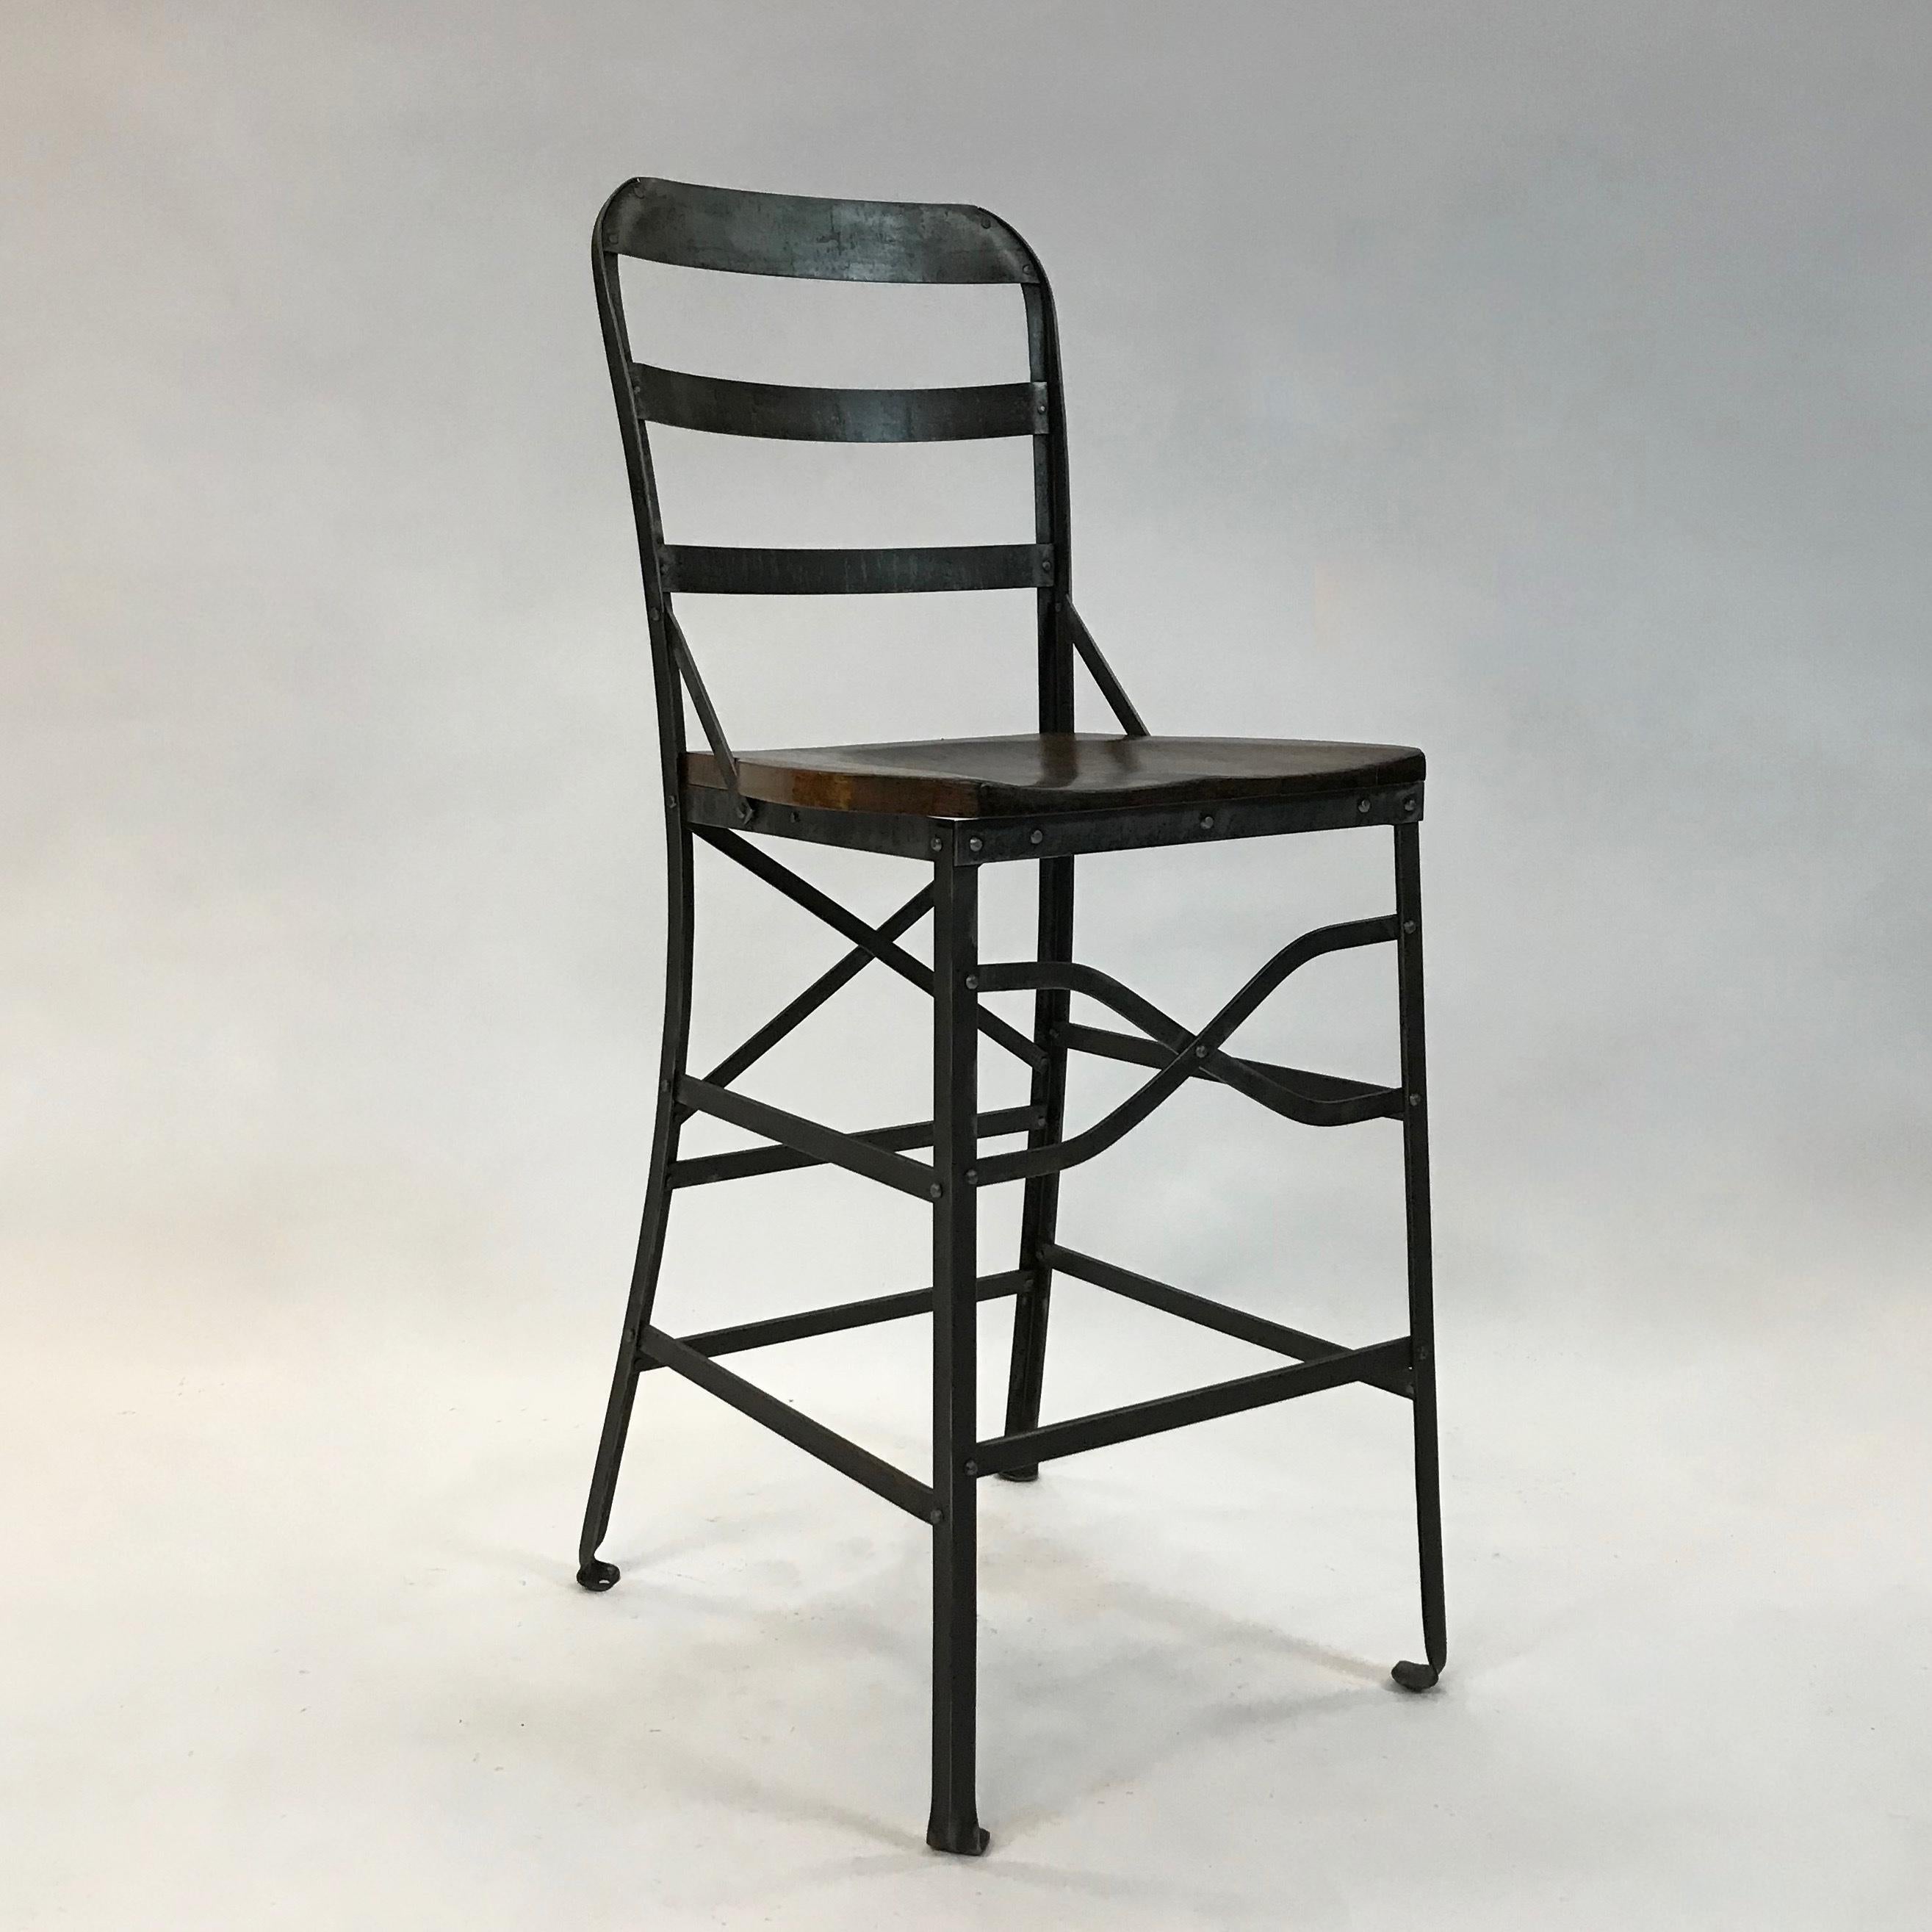 Industrial, counter height, shop stool features a wrought iron frame and contoured oak seat.